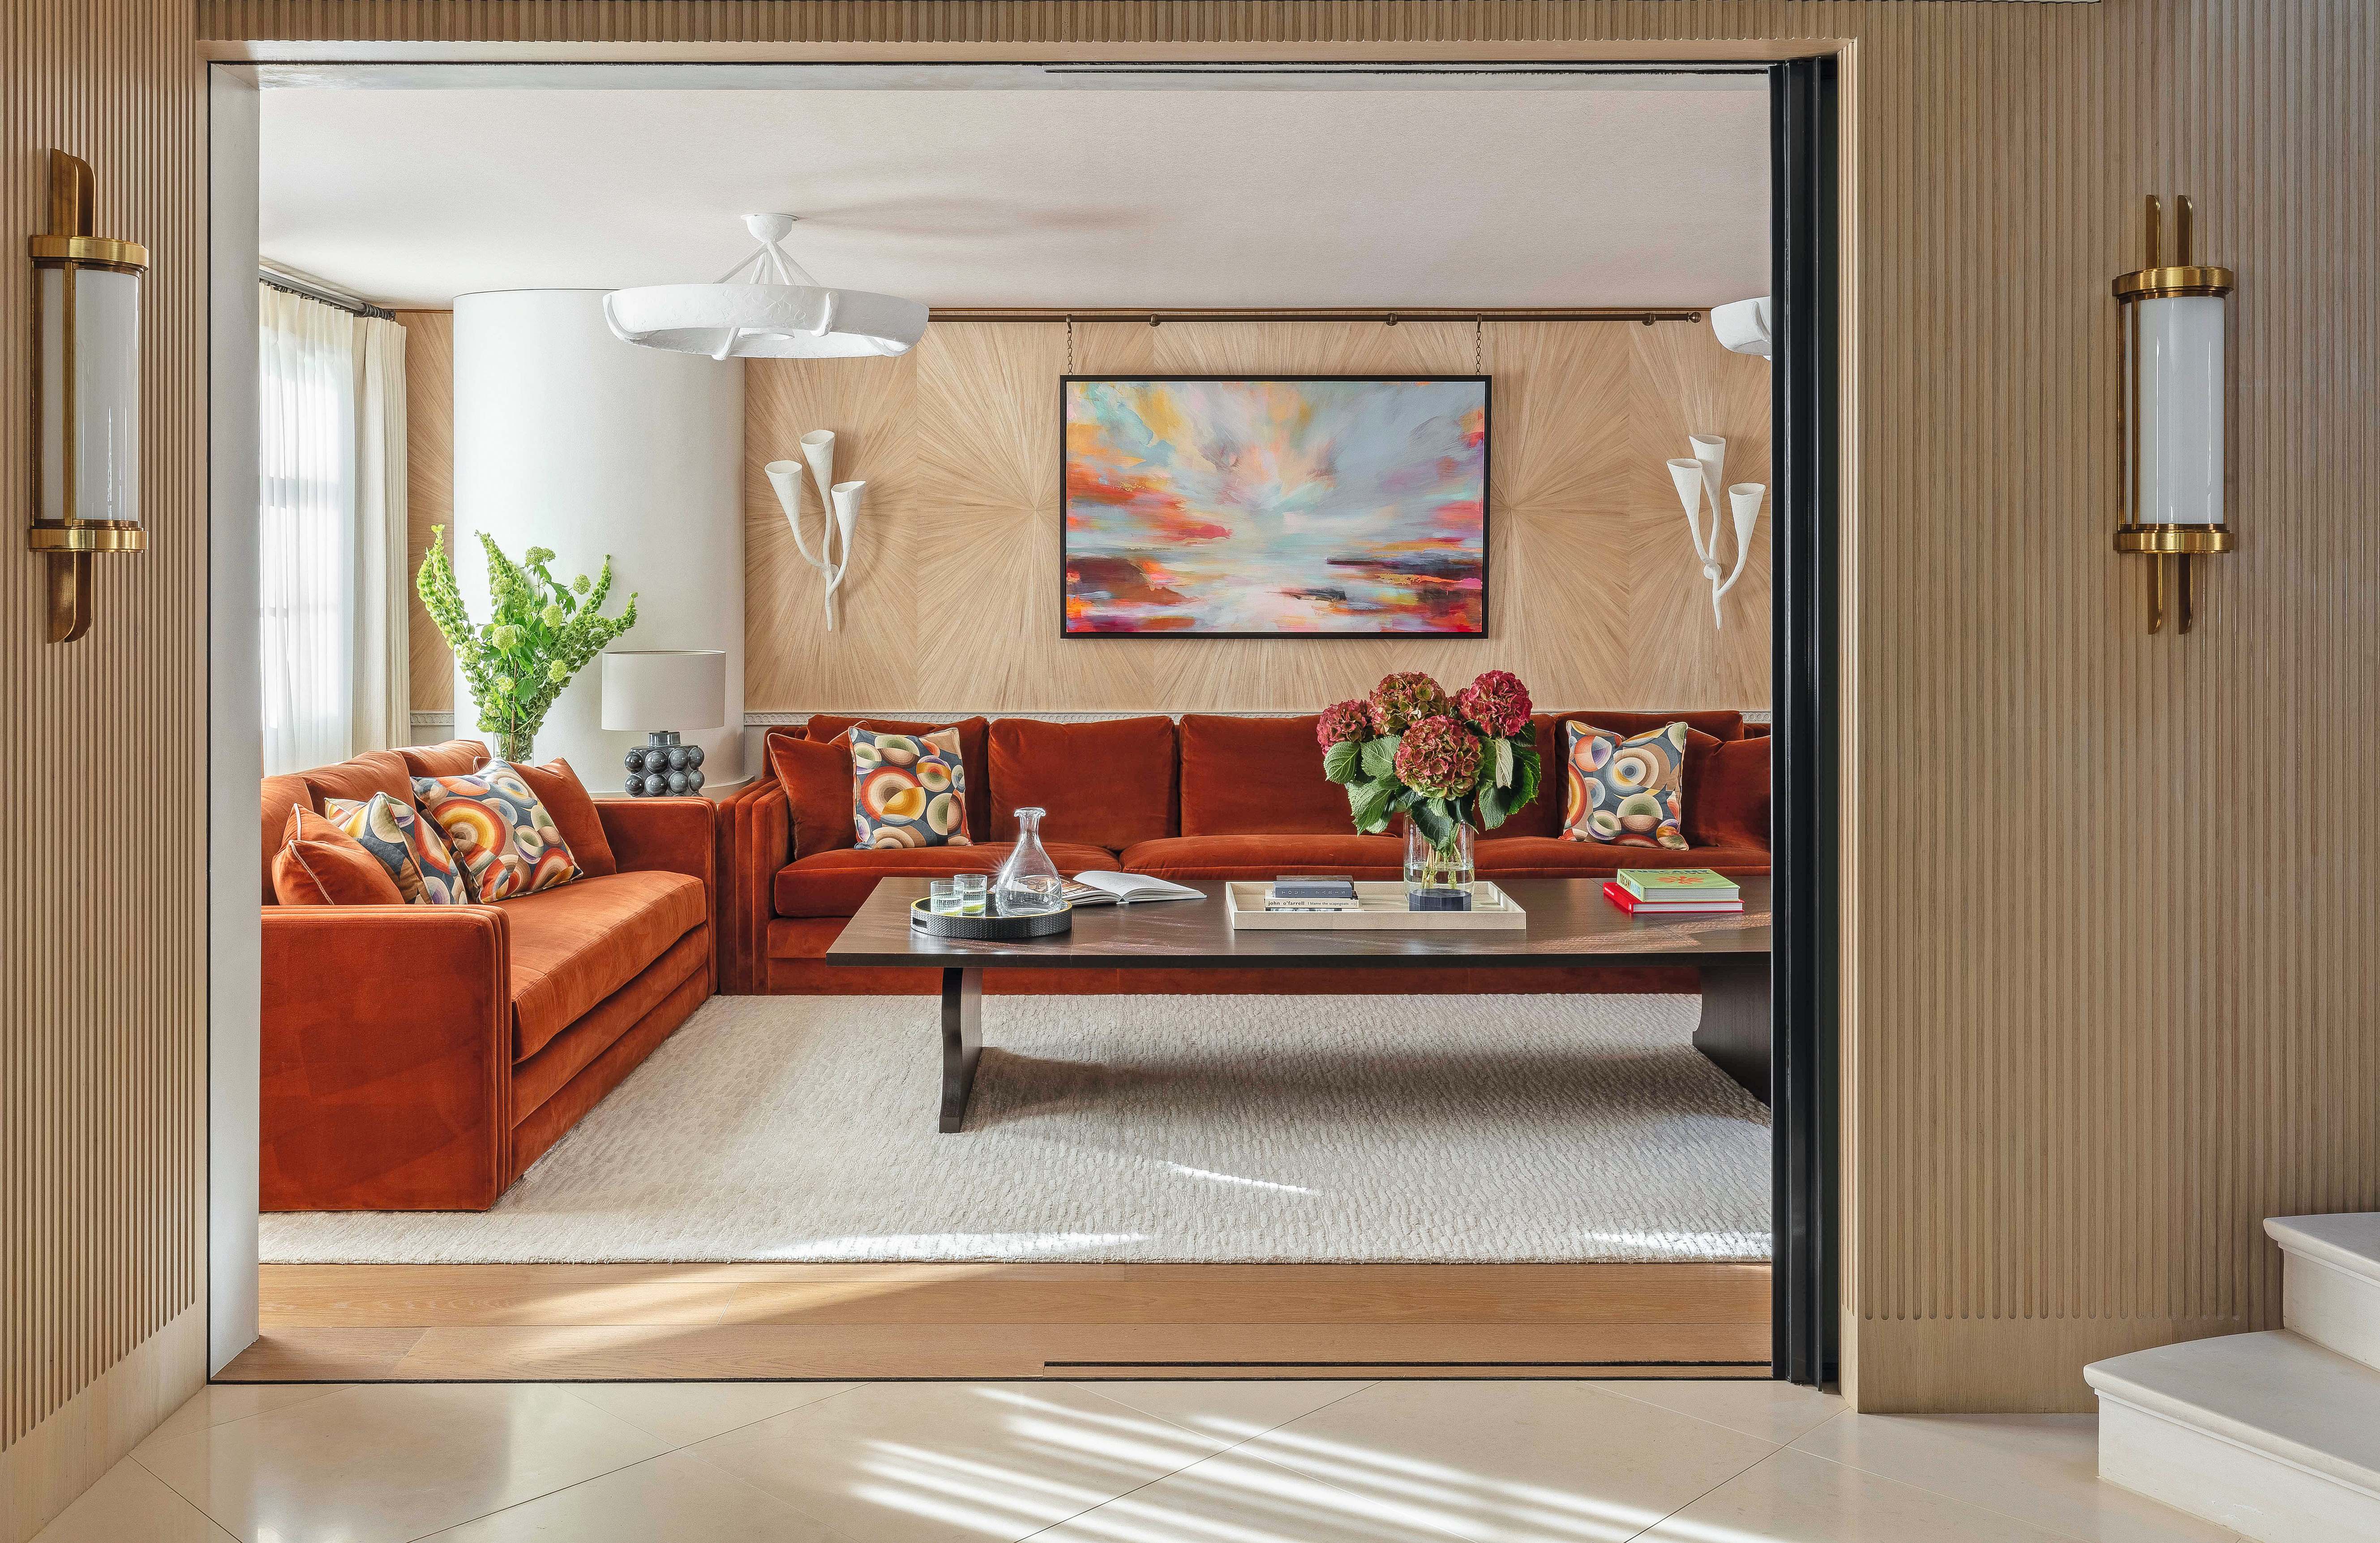 Modern living room with wooden clad walls and orange sofa